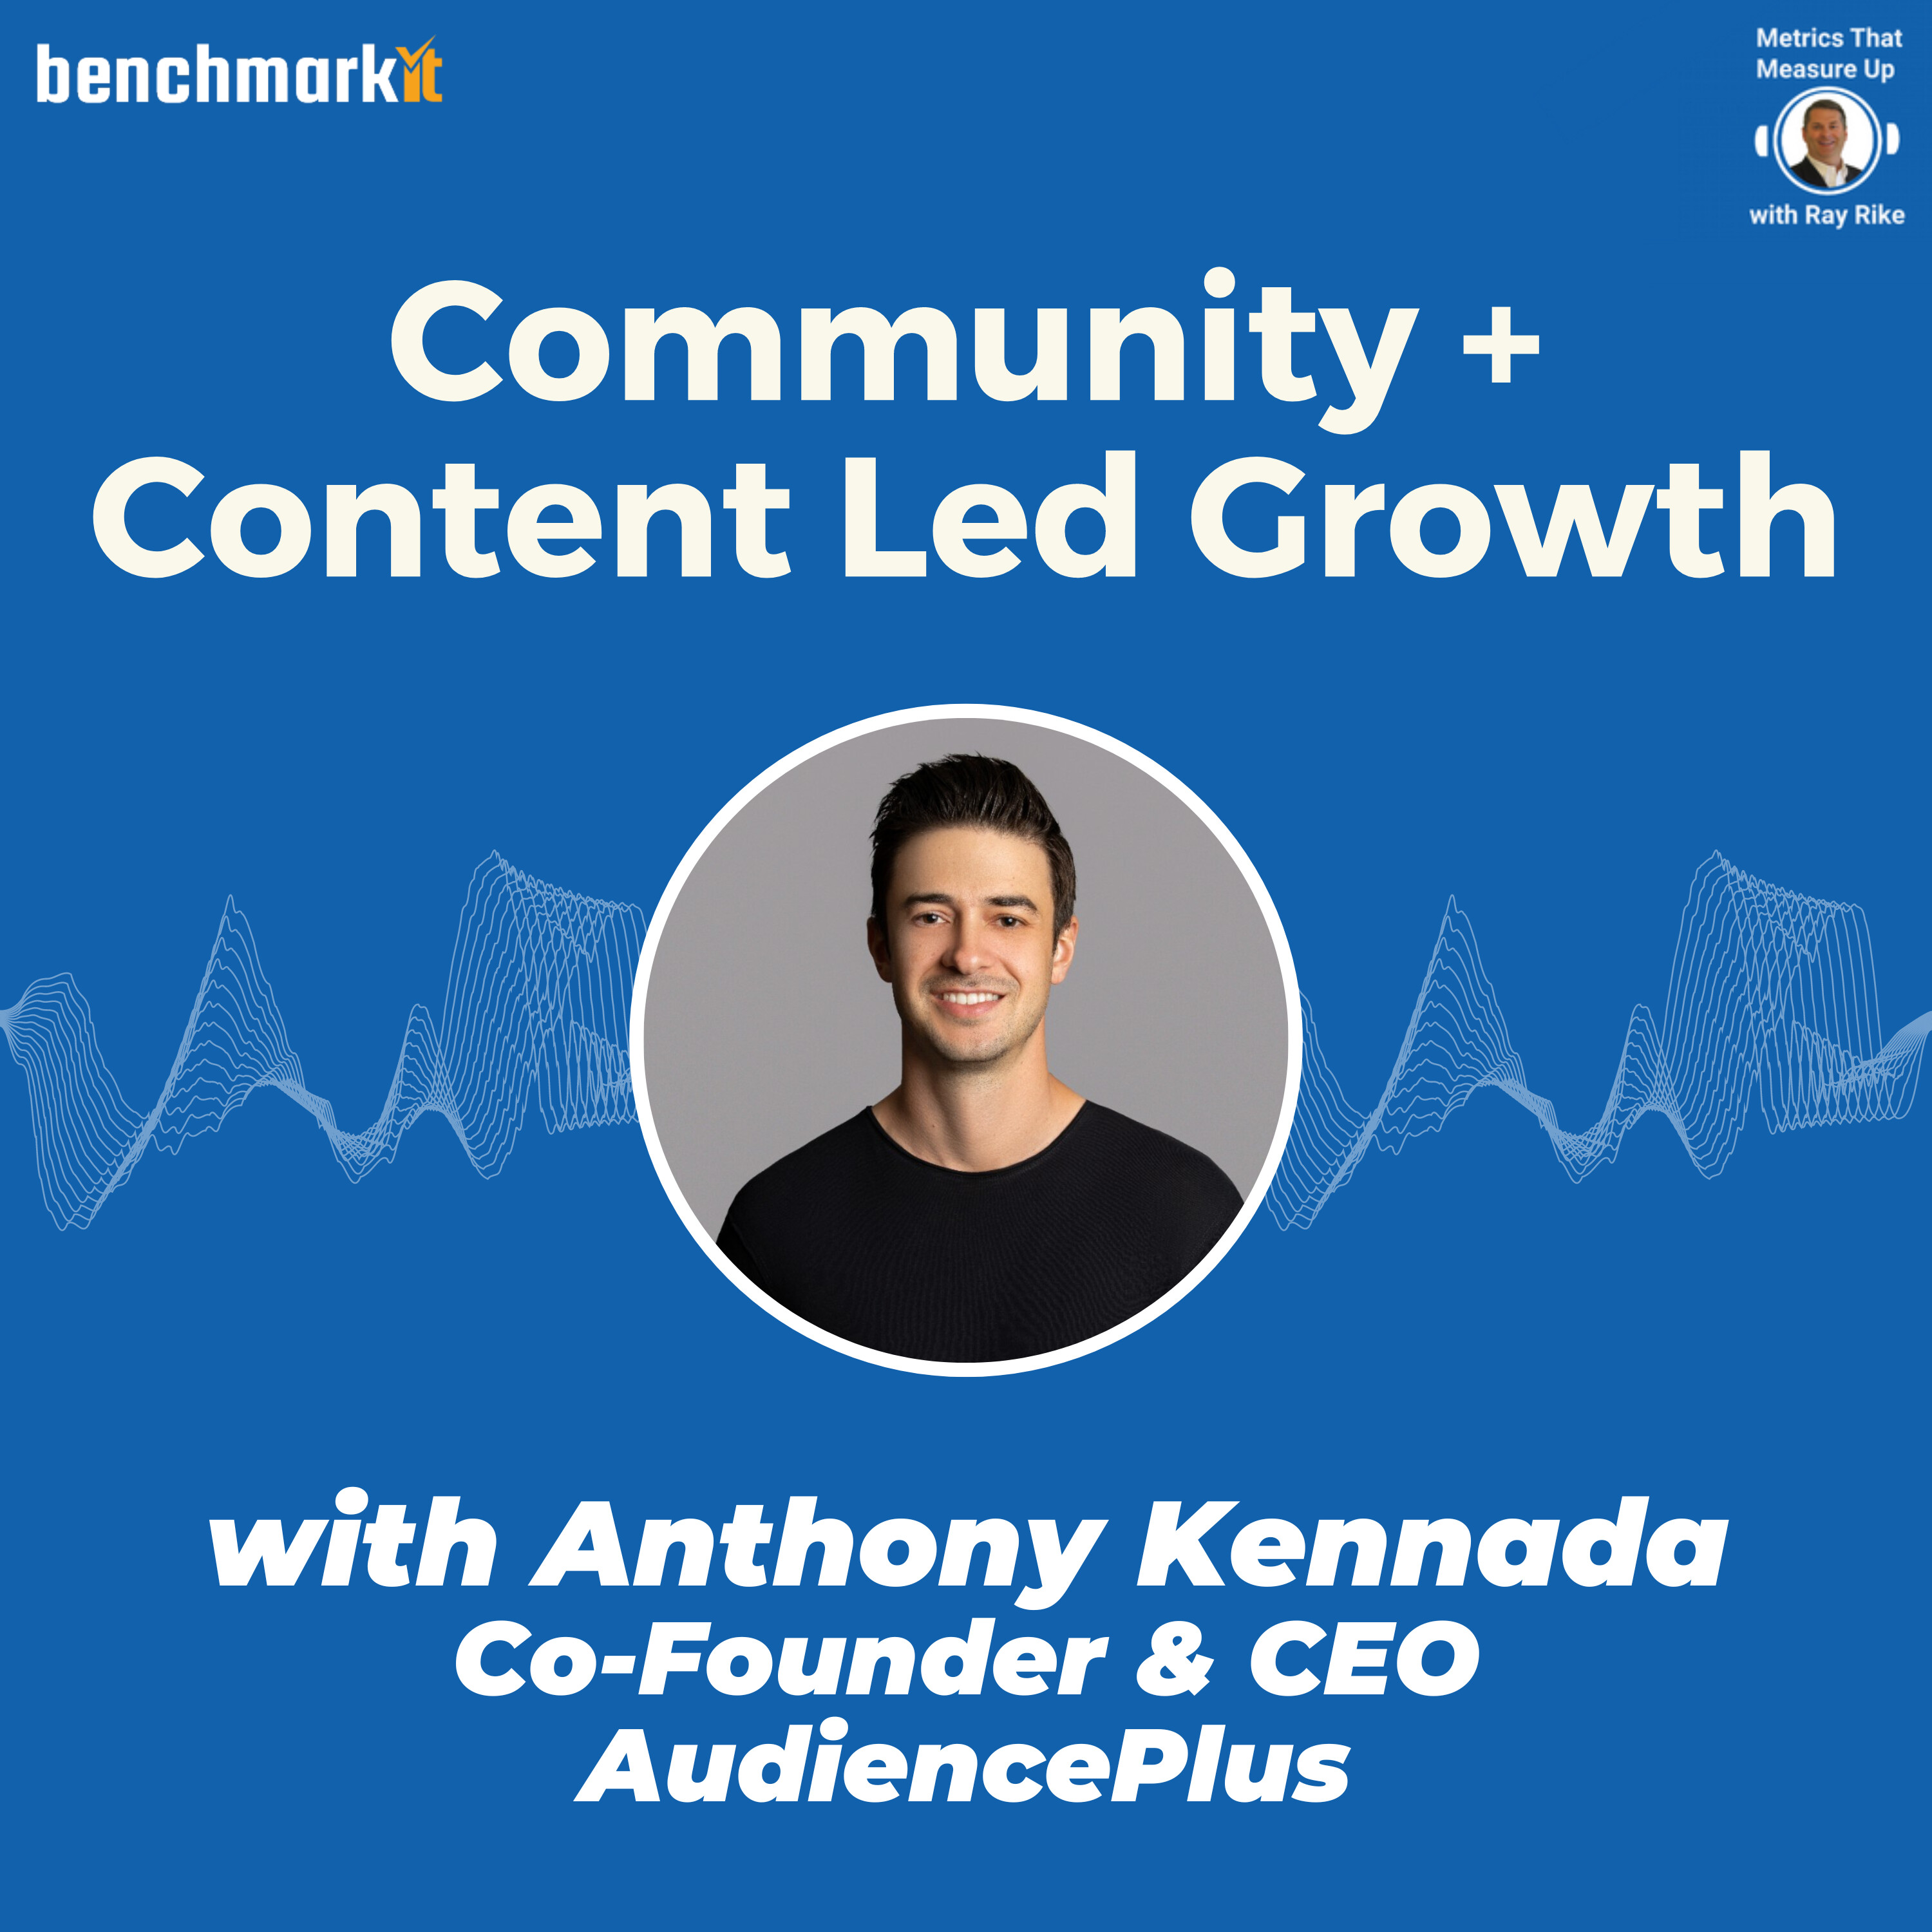 Community + Content + Event Lead Growth - with Anthony Kennada, Founder and CEO AudiencePlus